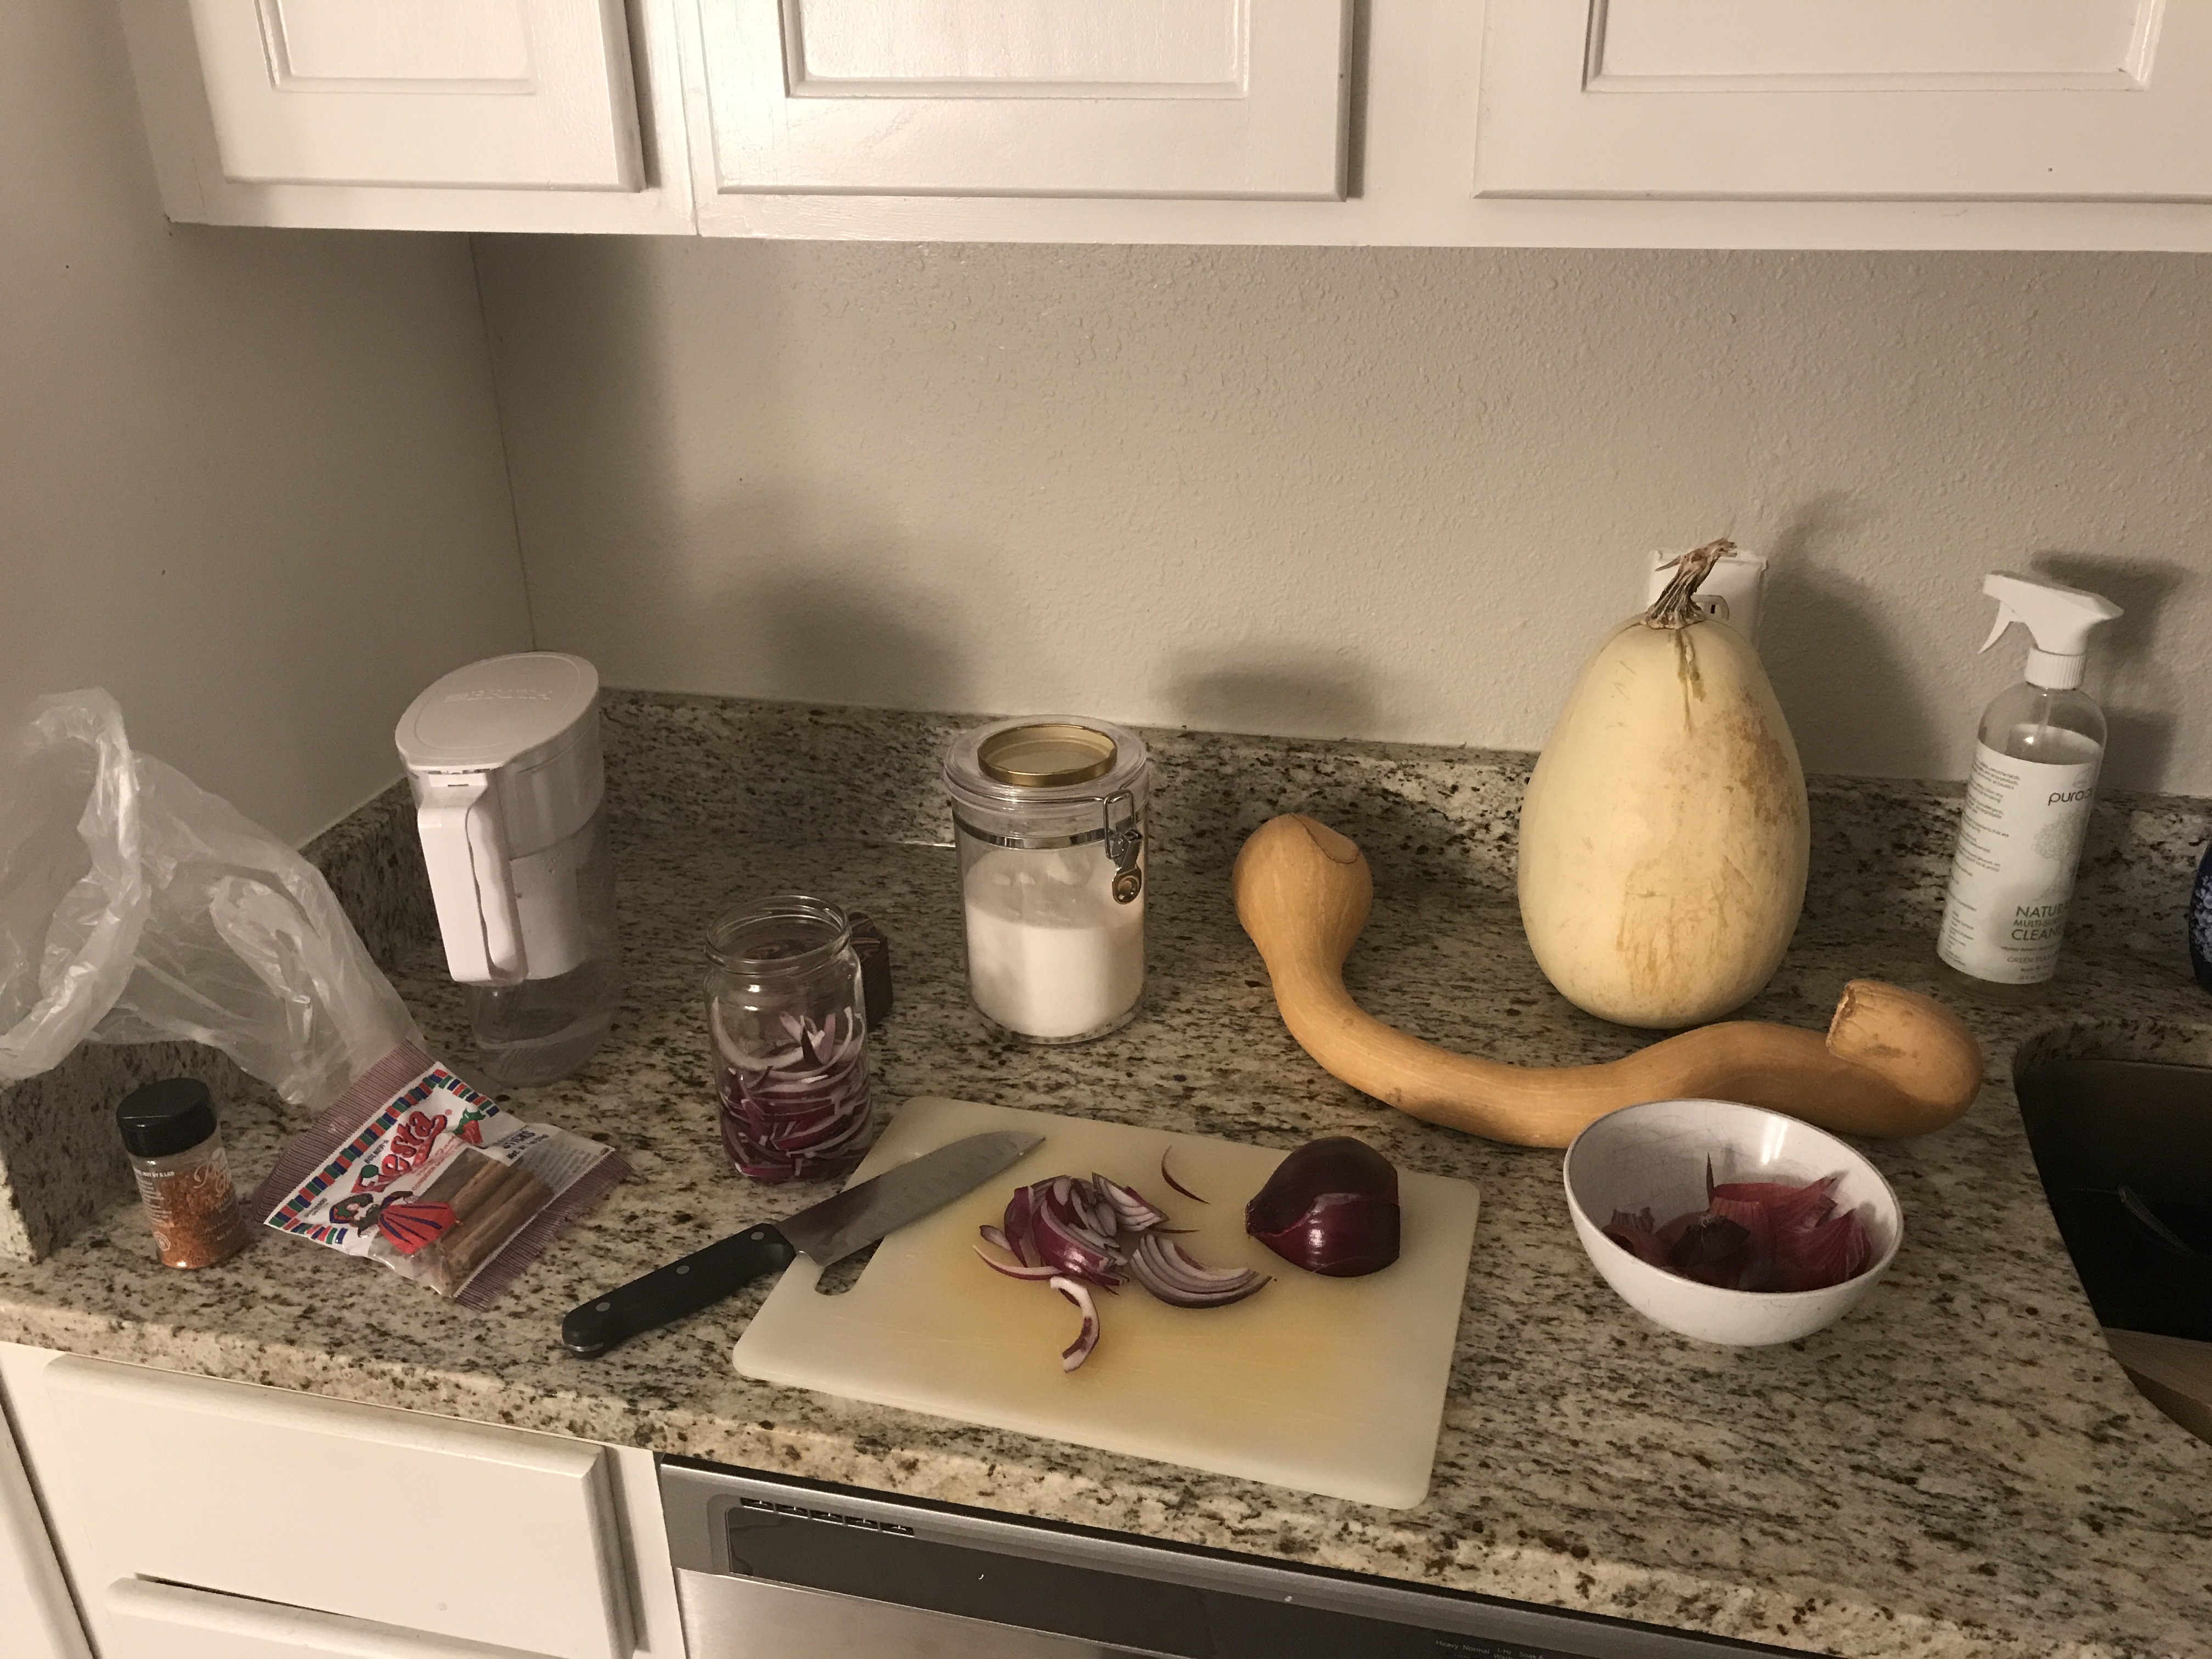 A messy kitchen counter containing a cutting board with a red onion, a couple of weird pumpkins that I avoided cooking into pie, and a half-full jar for fermenting in.